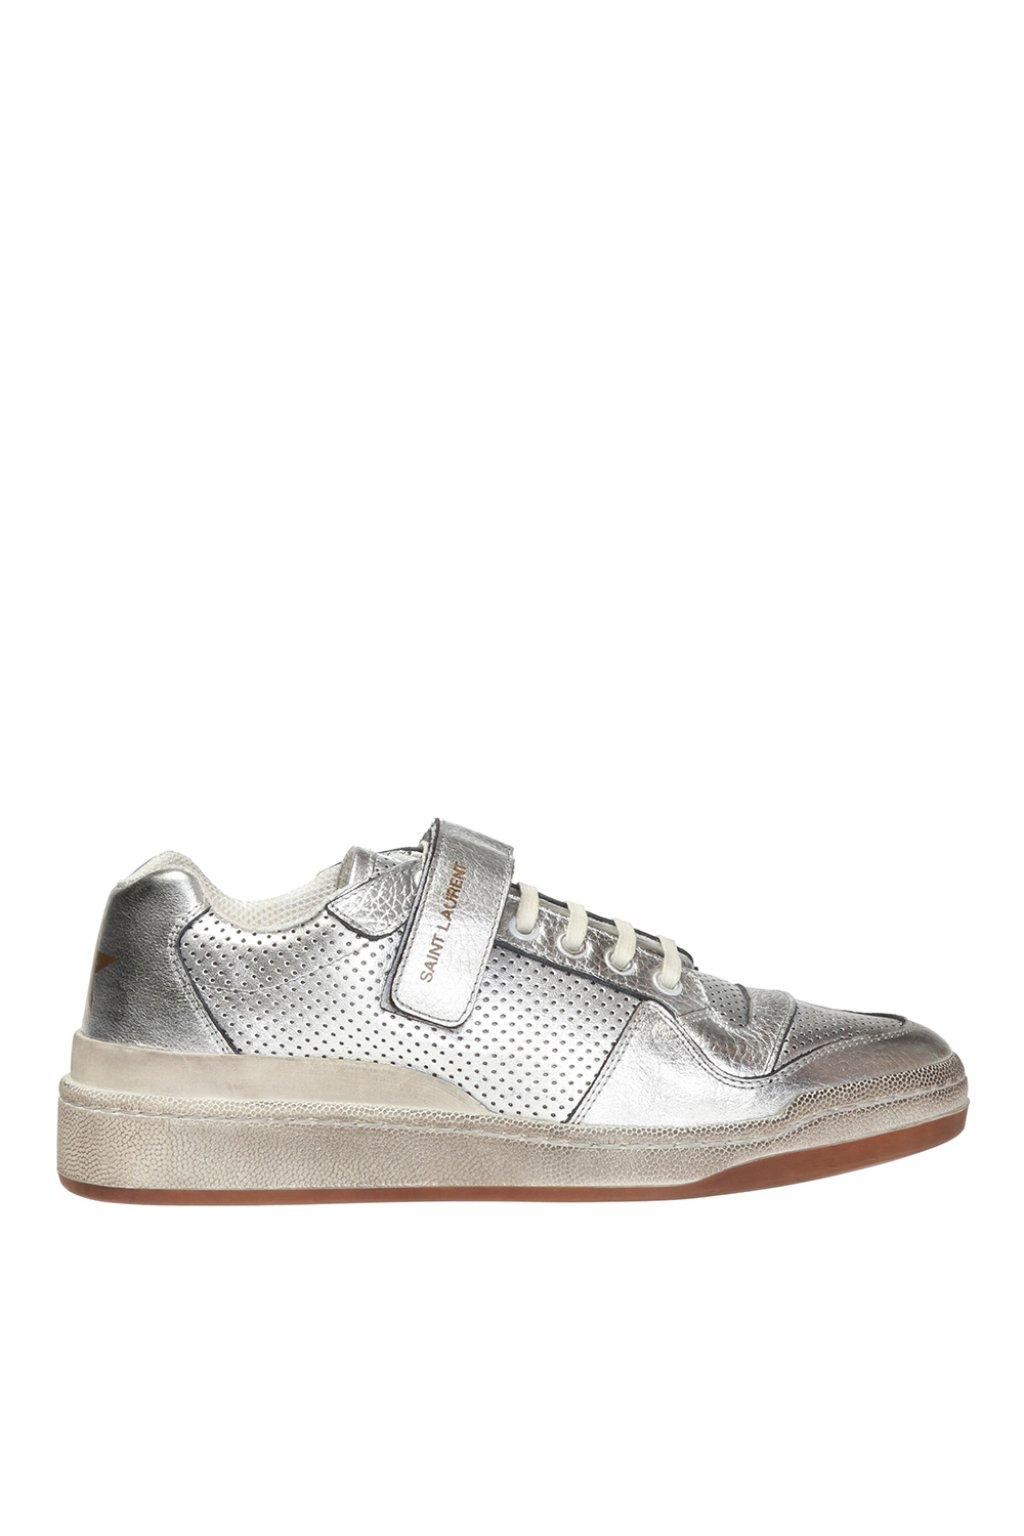 Saint Laurent Leather 'sl24' Sneakers With Logo in Silver (Metallic) - Lyst